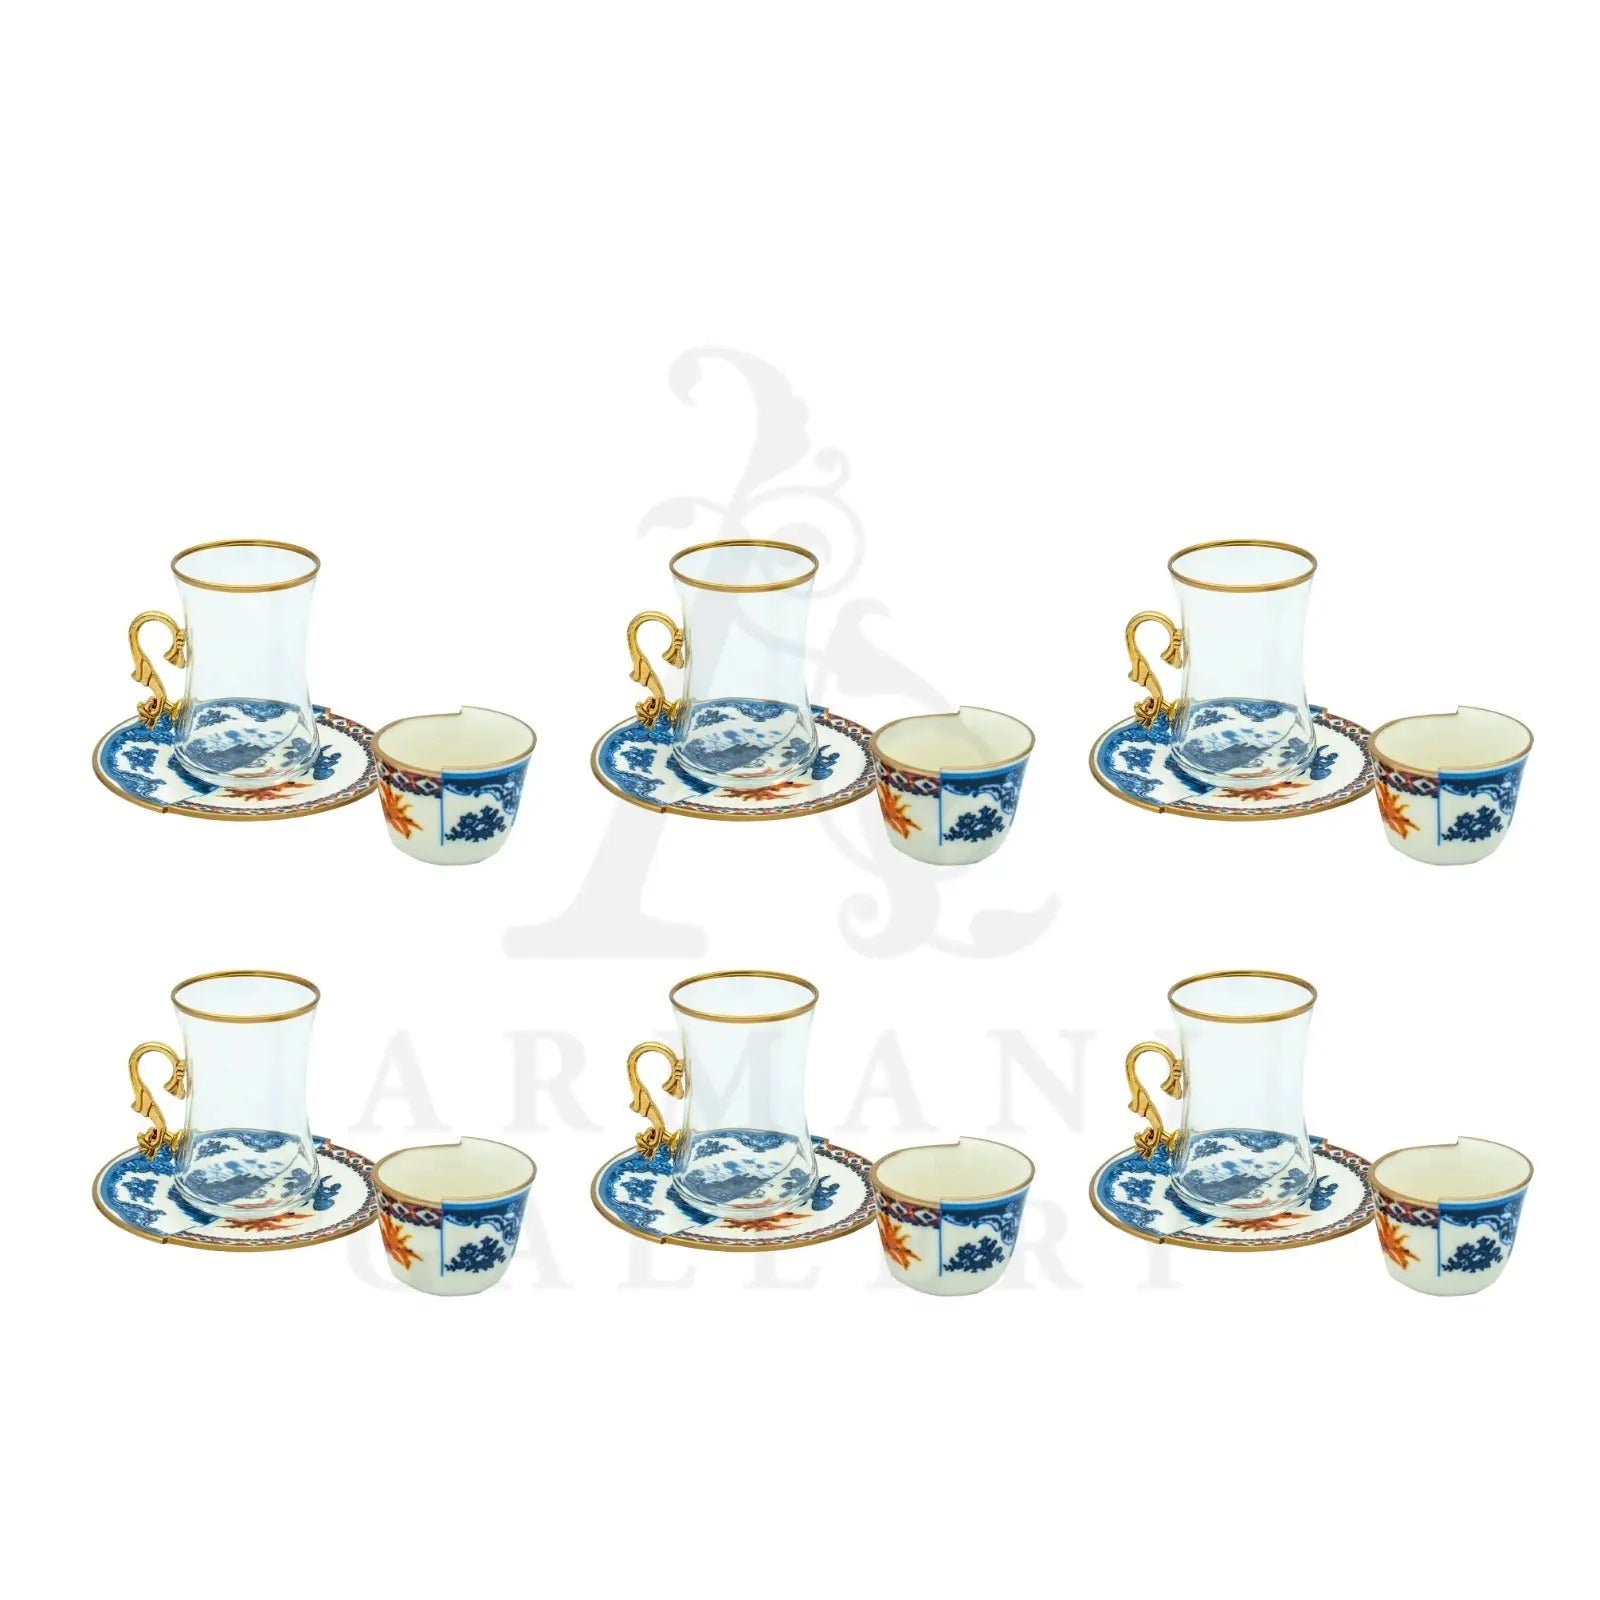 Turkish Coffee and Tea Cup With Handle Set Orange and Blue Fish 18 Pcs - Armani Gallery